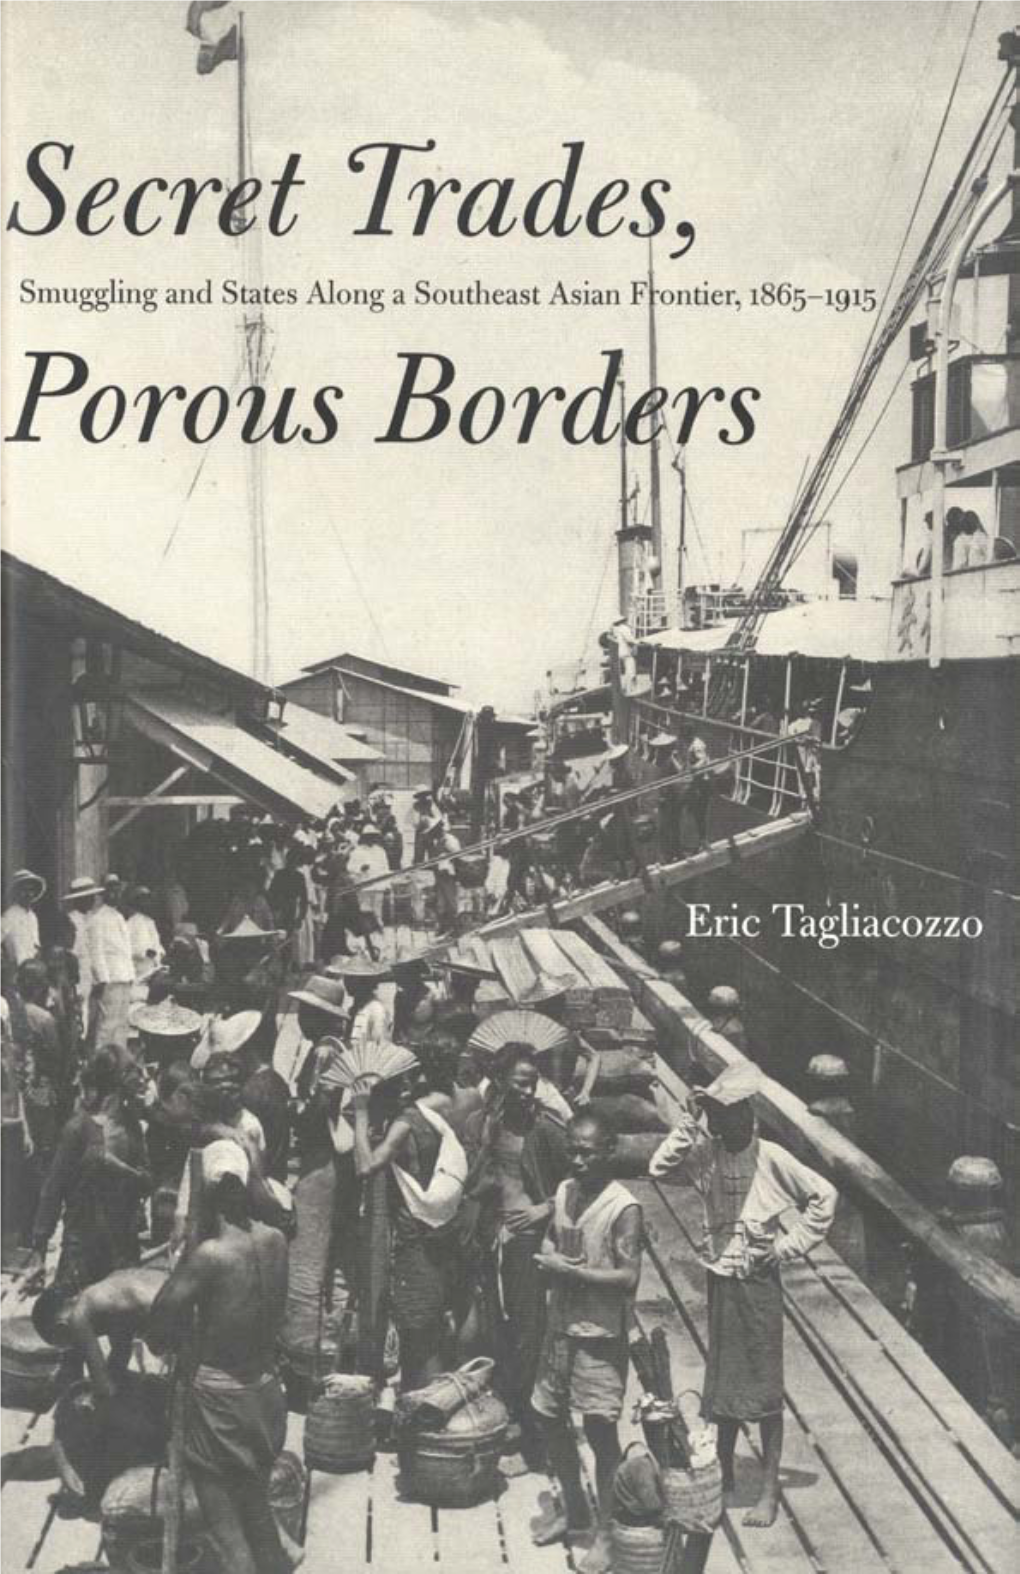 Secret Trades, Porous Borders : Smuggling and States Along a Southeast Asian Frontier, ‒ / Eric Tagliacozzo